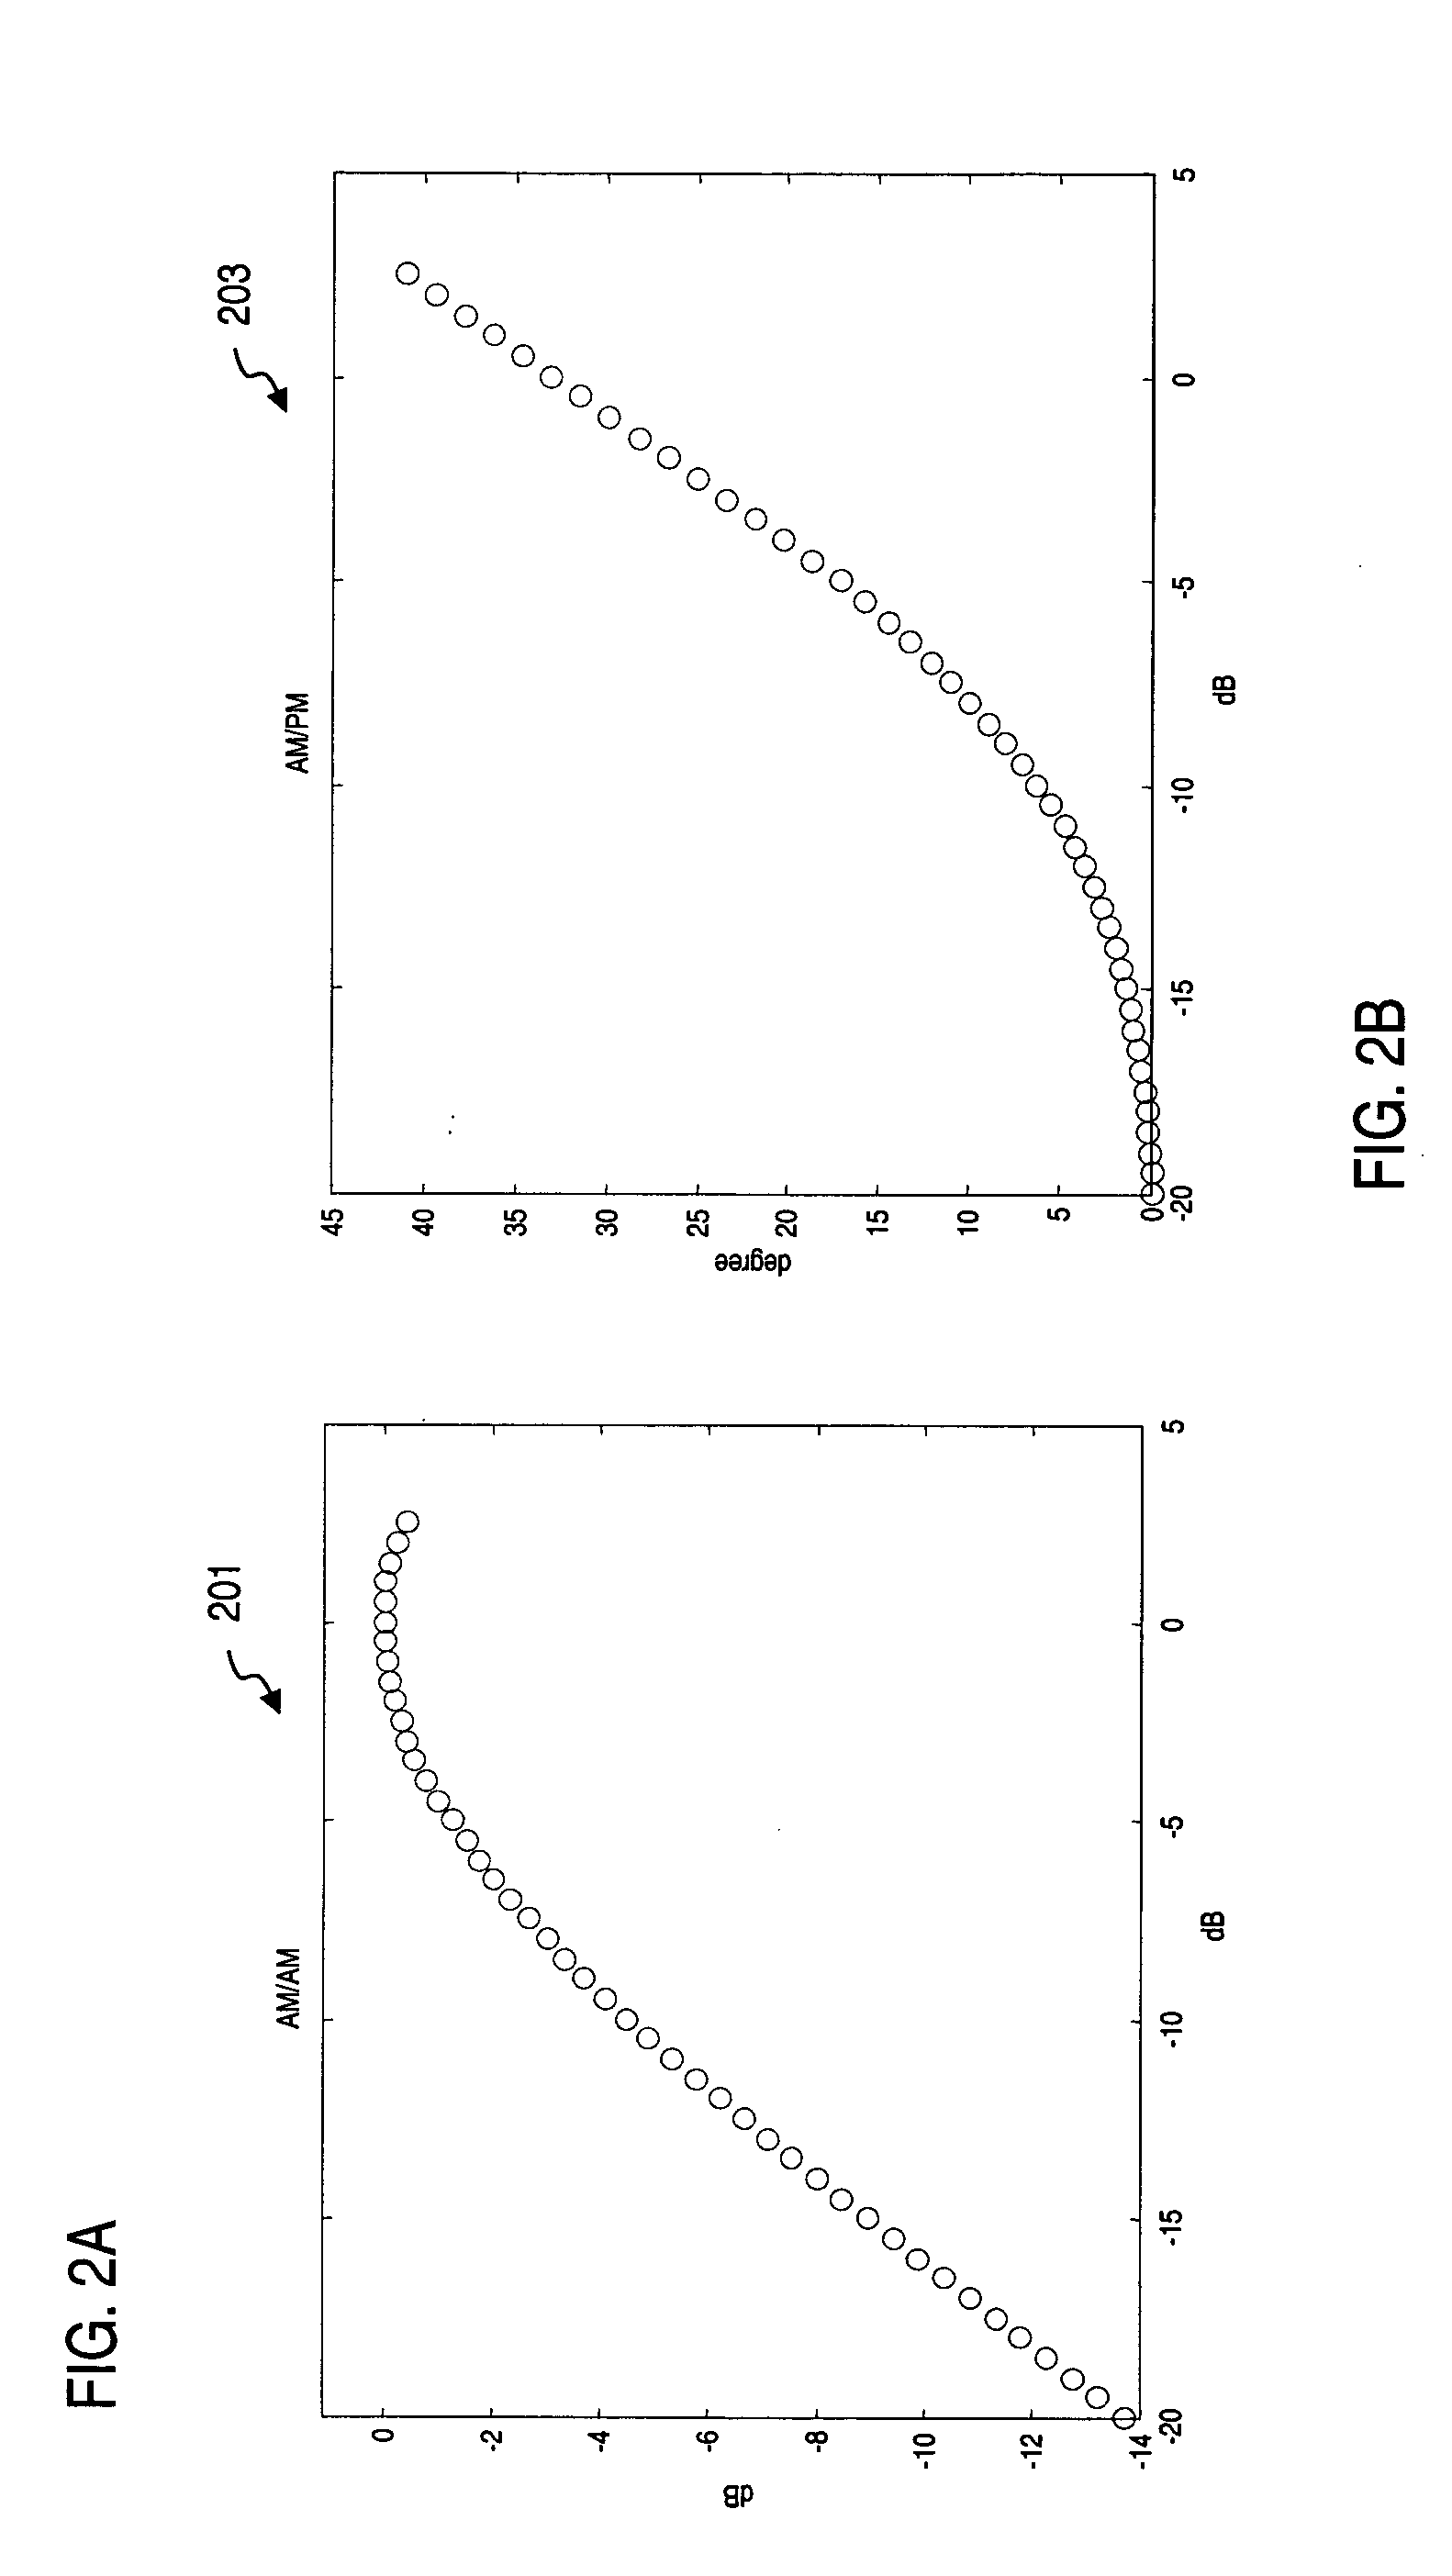 Method and apparatus of estimating non-linear amplifier response in an overlaid communication system